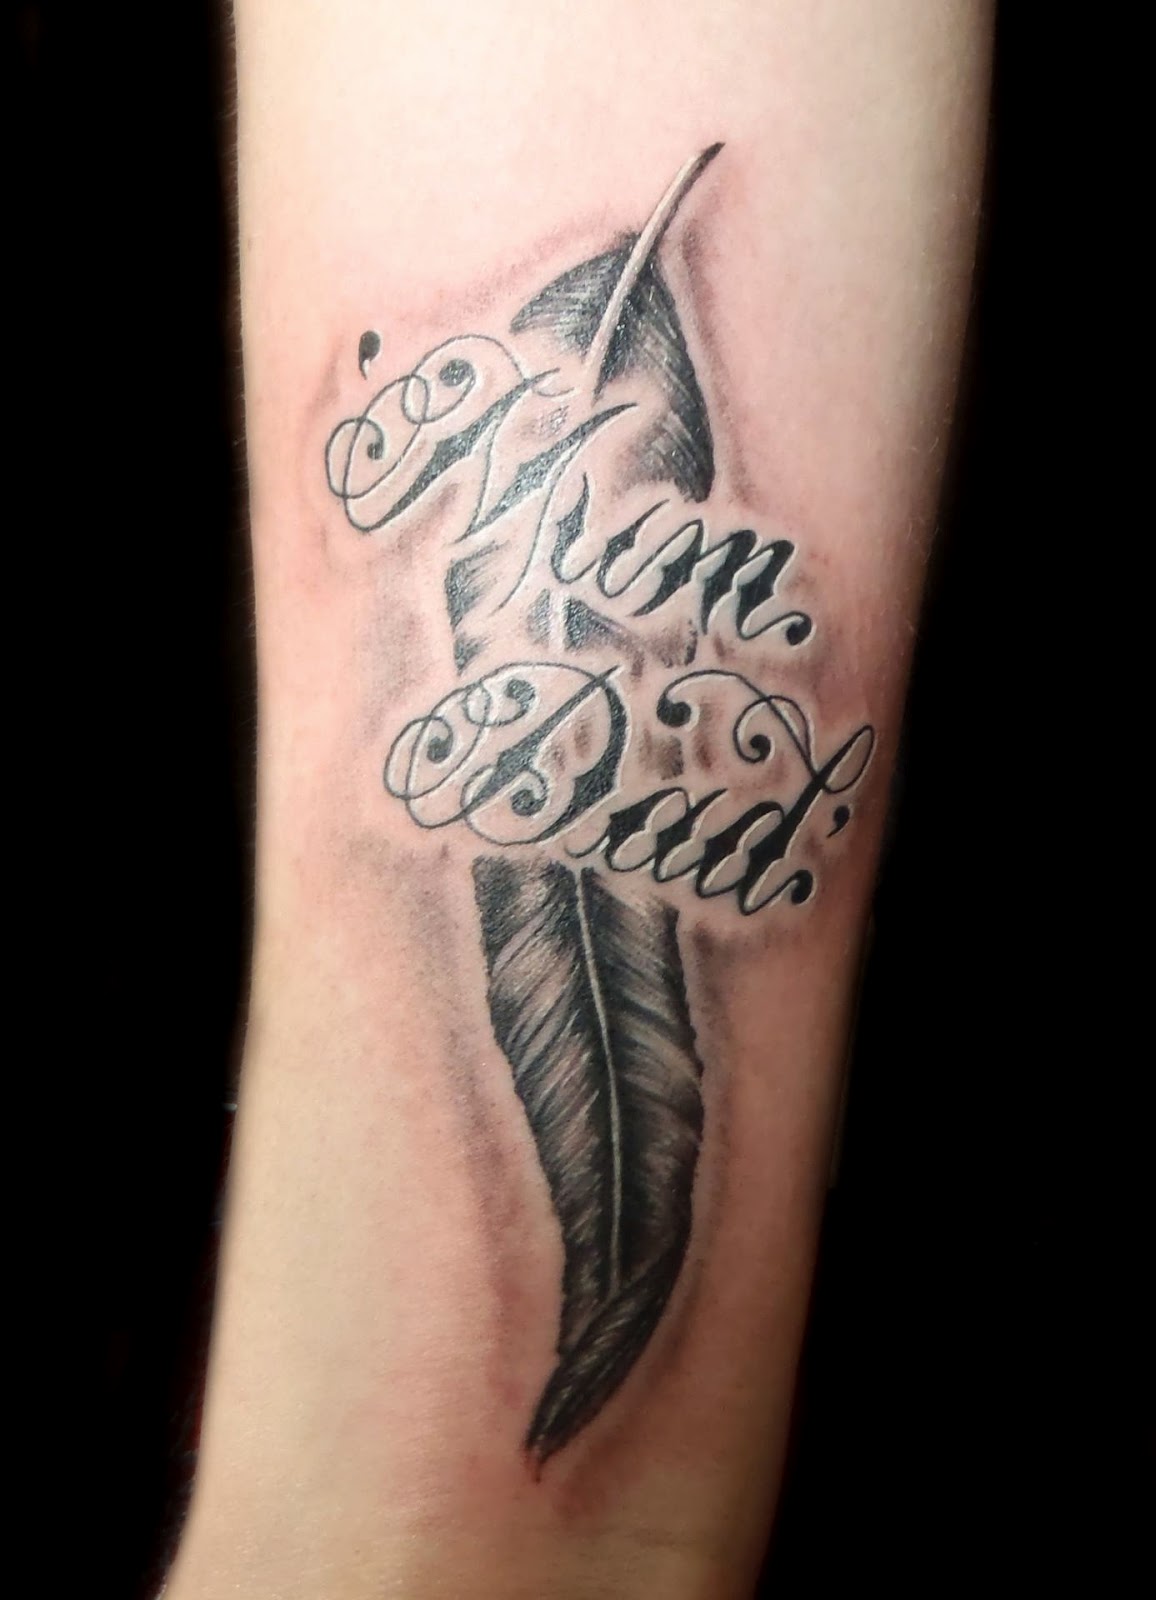 Amazing Feather Mom And Dad Tattoo On Arm - Mom And Dad Tattoo Designs For  Wrists - 1156x1600 Wallpaper 